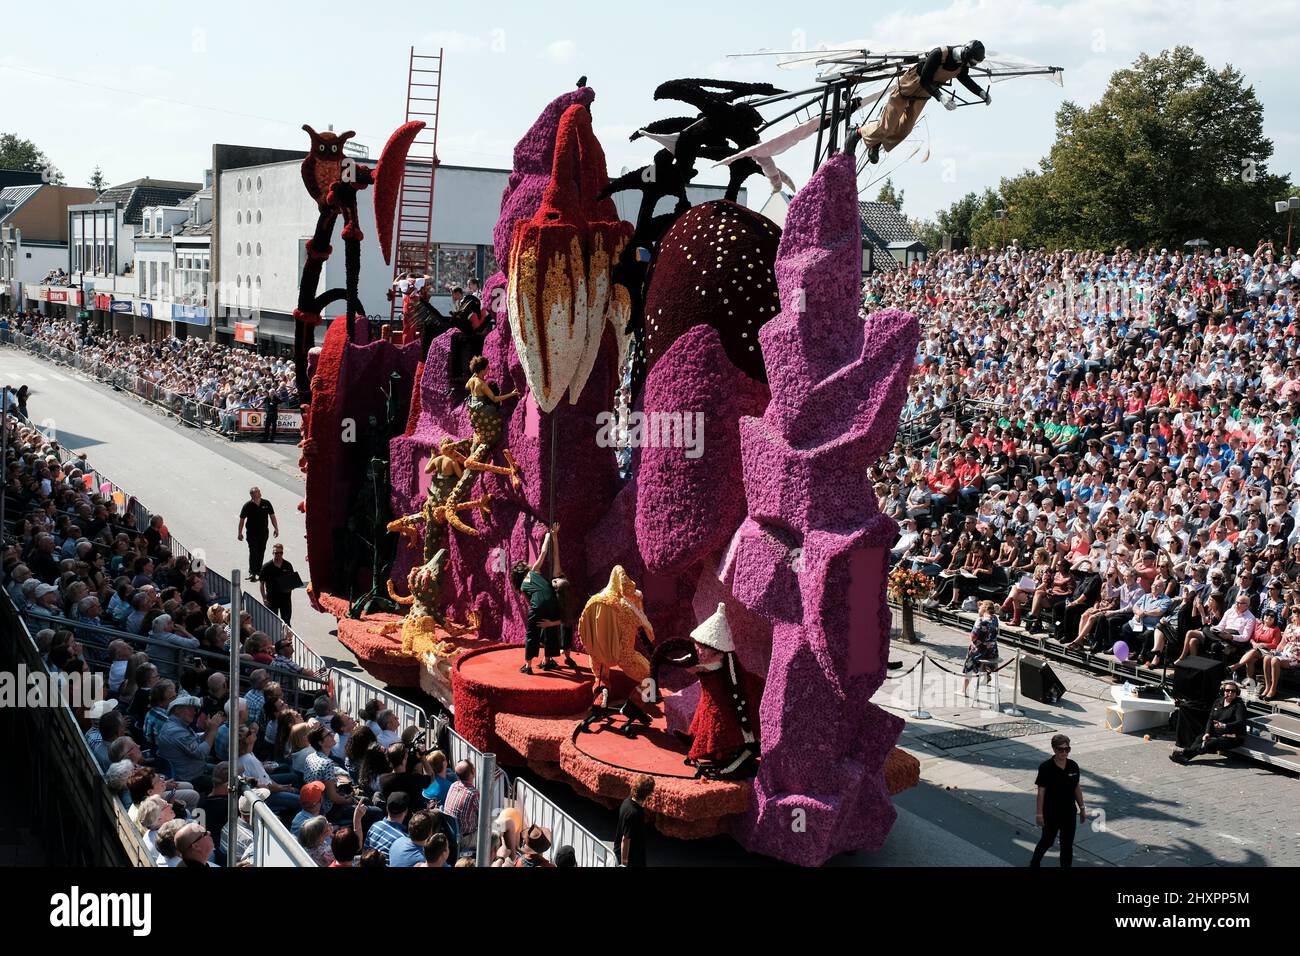 Bosqueriano float during its participation in the parade. Stock Photo